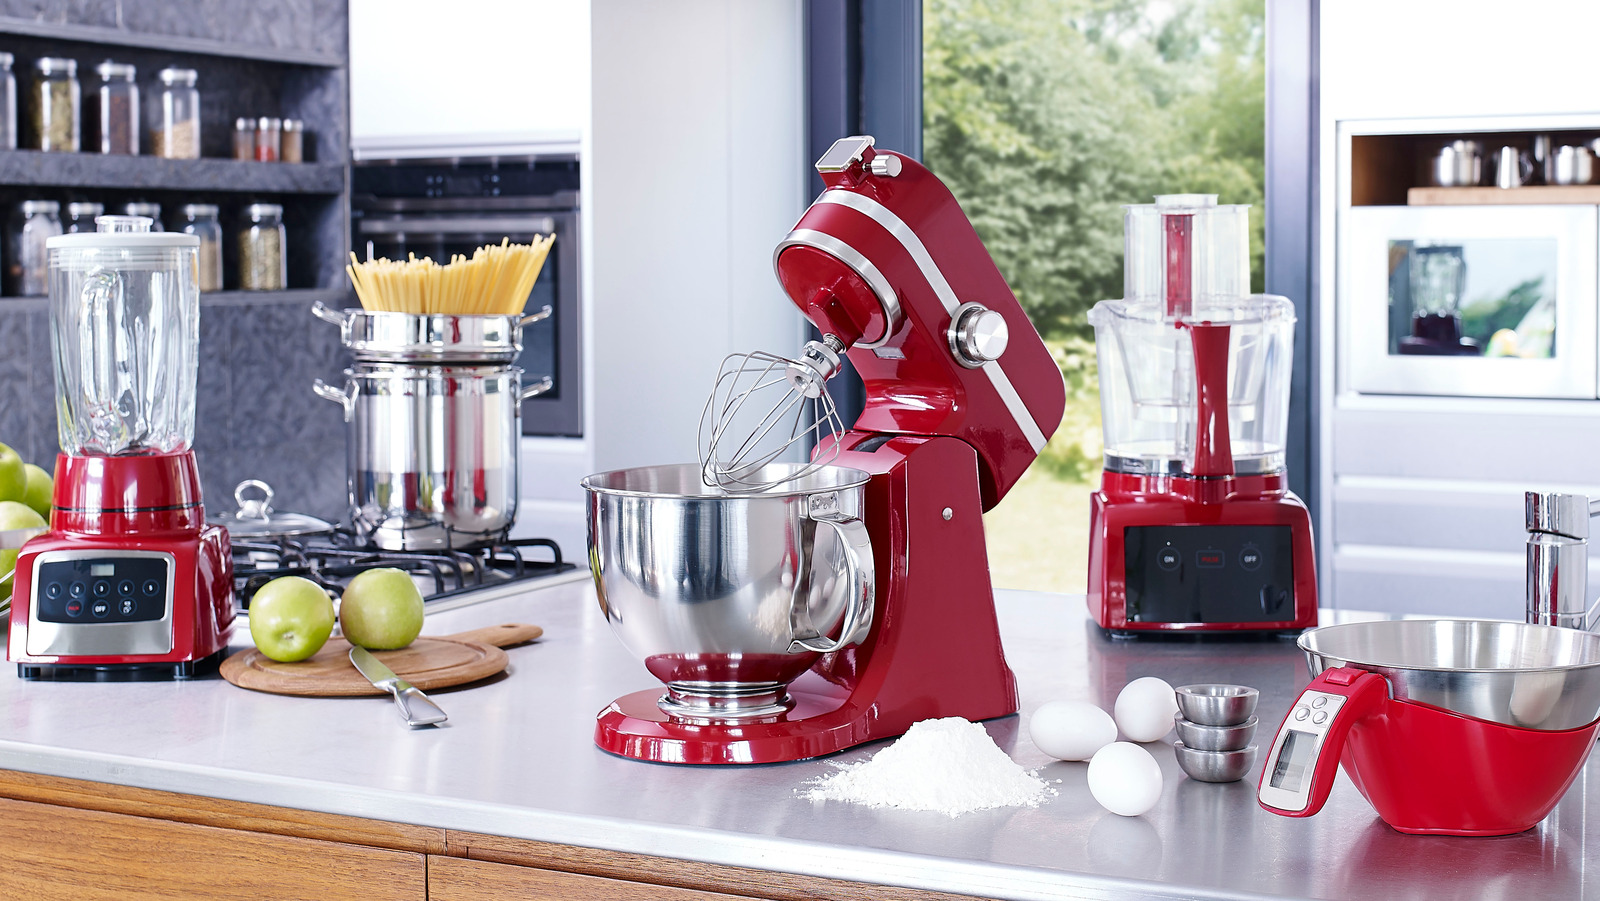 The Kitchen Appliances You Should Never Buy, According To Professional Chefs